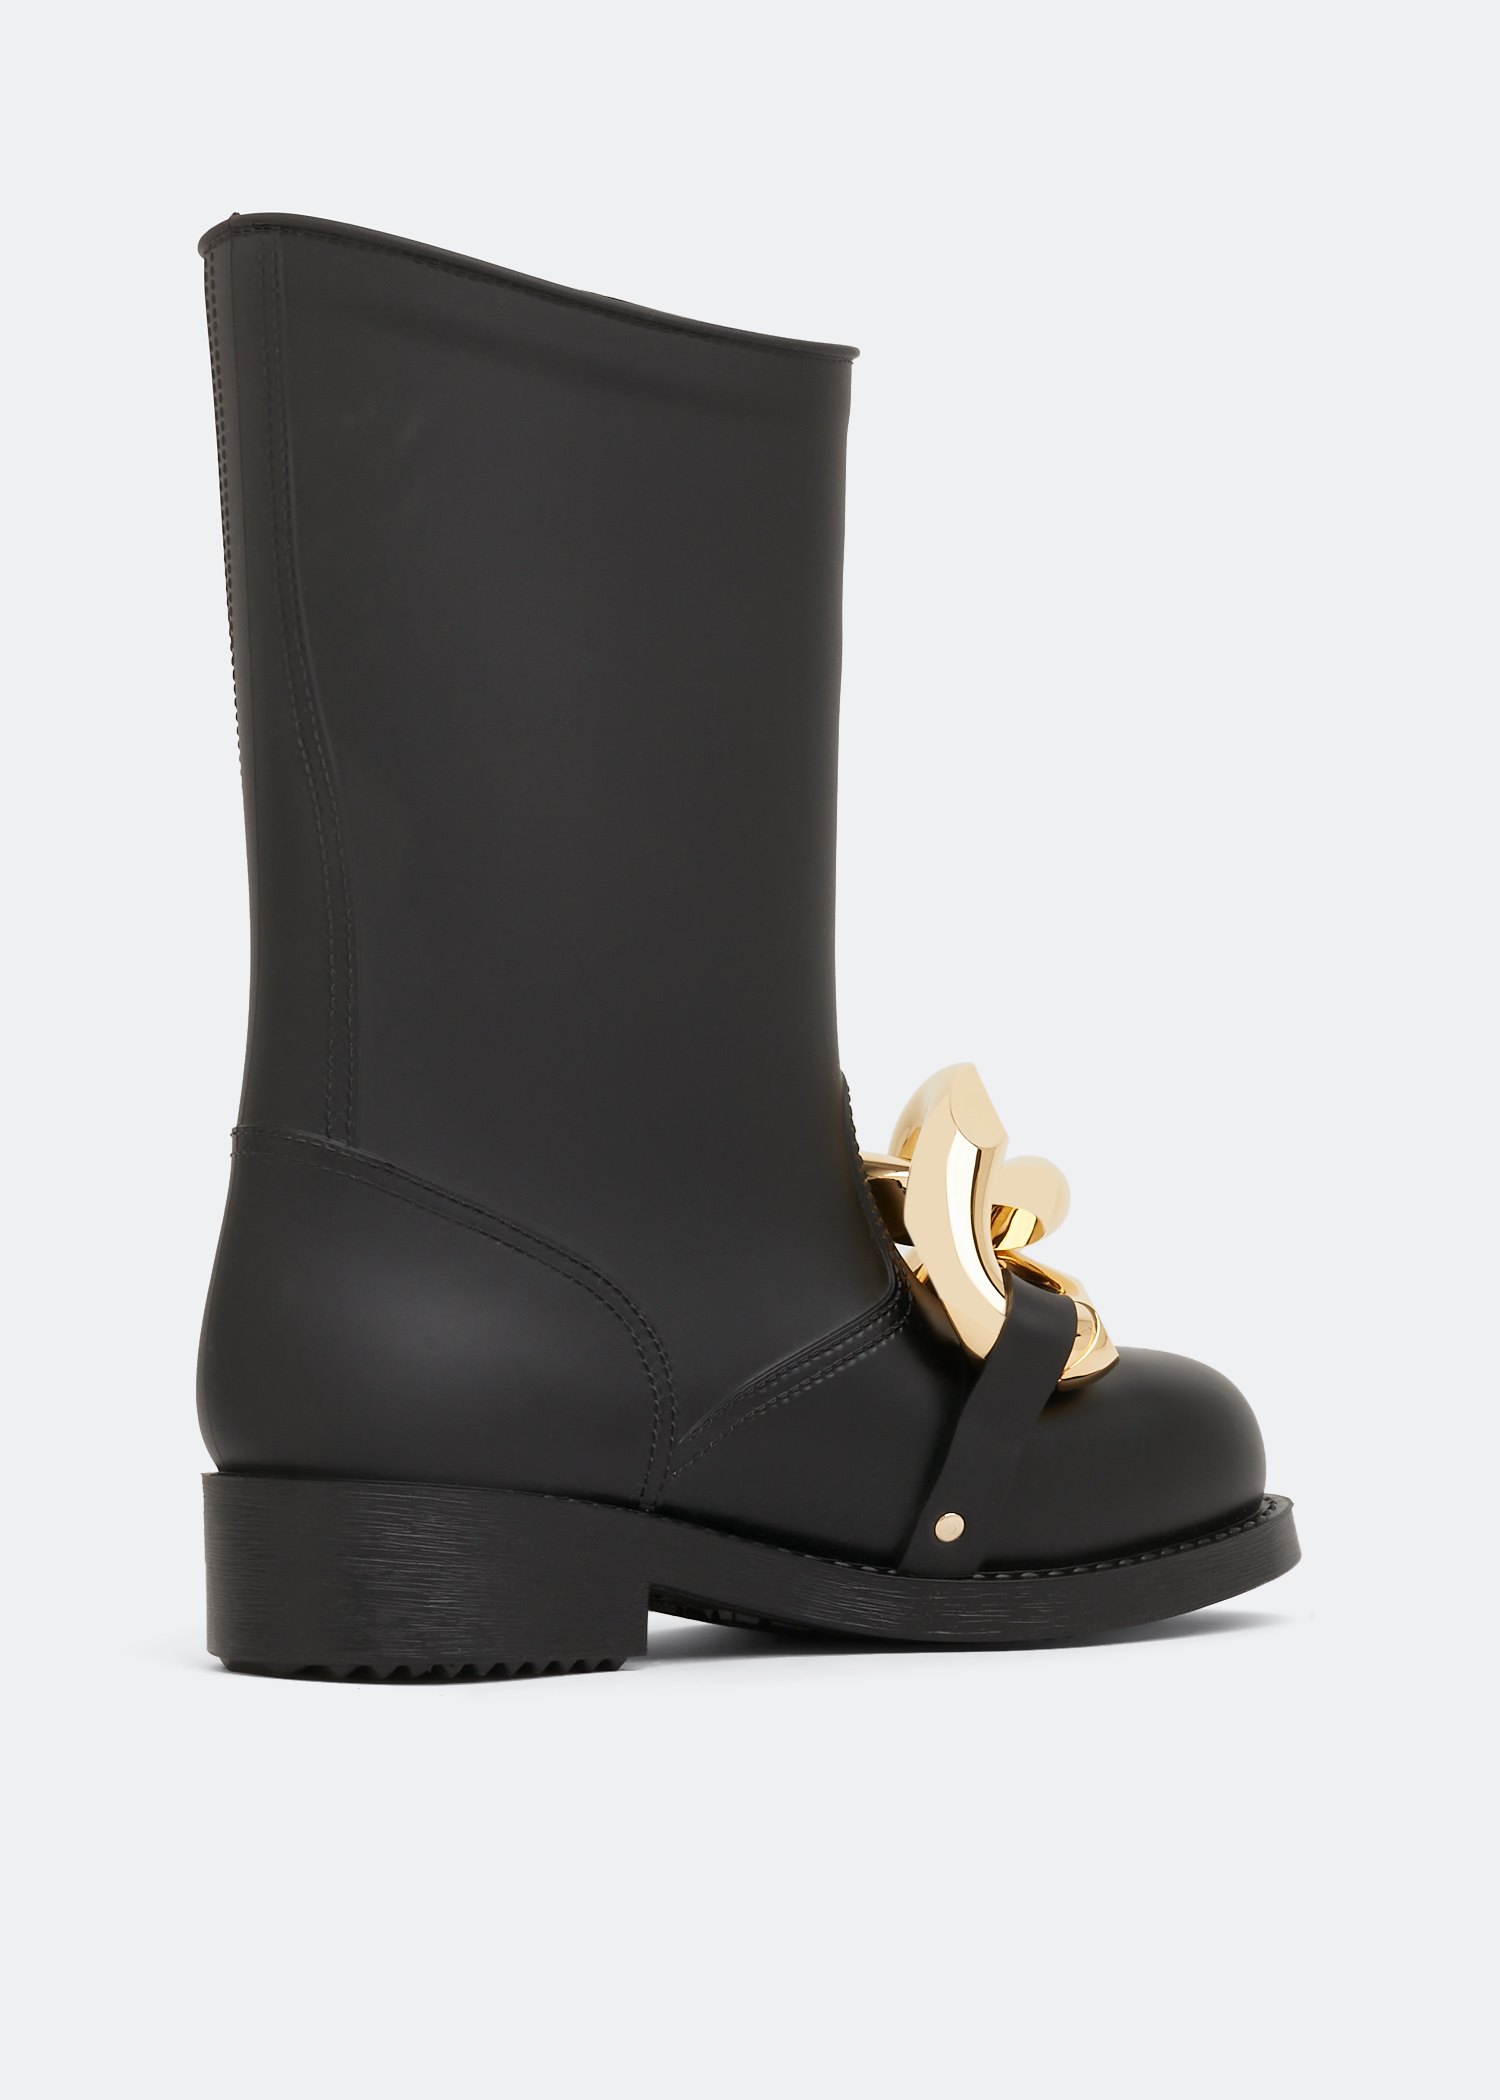 JW Anderson High Chain rubber boots for Women - Black in KSA | Level Shoes